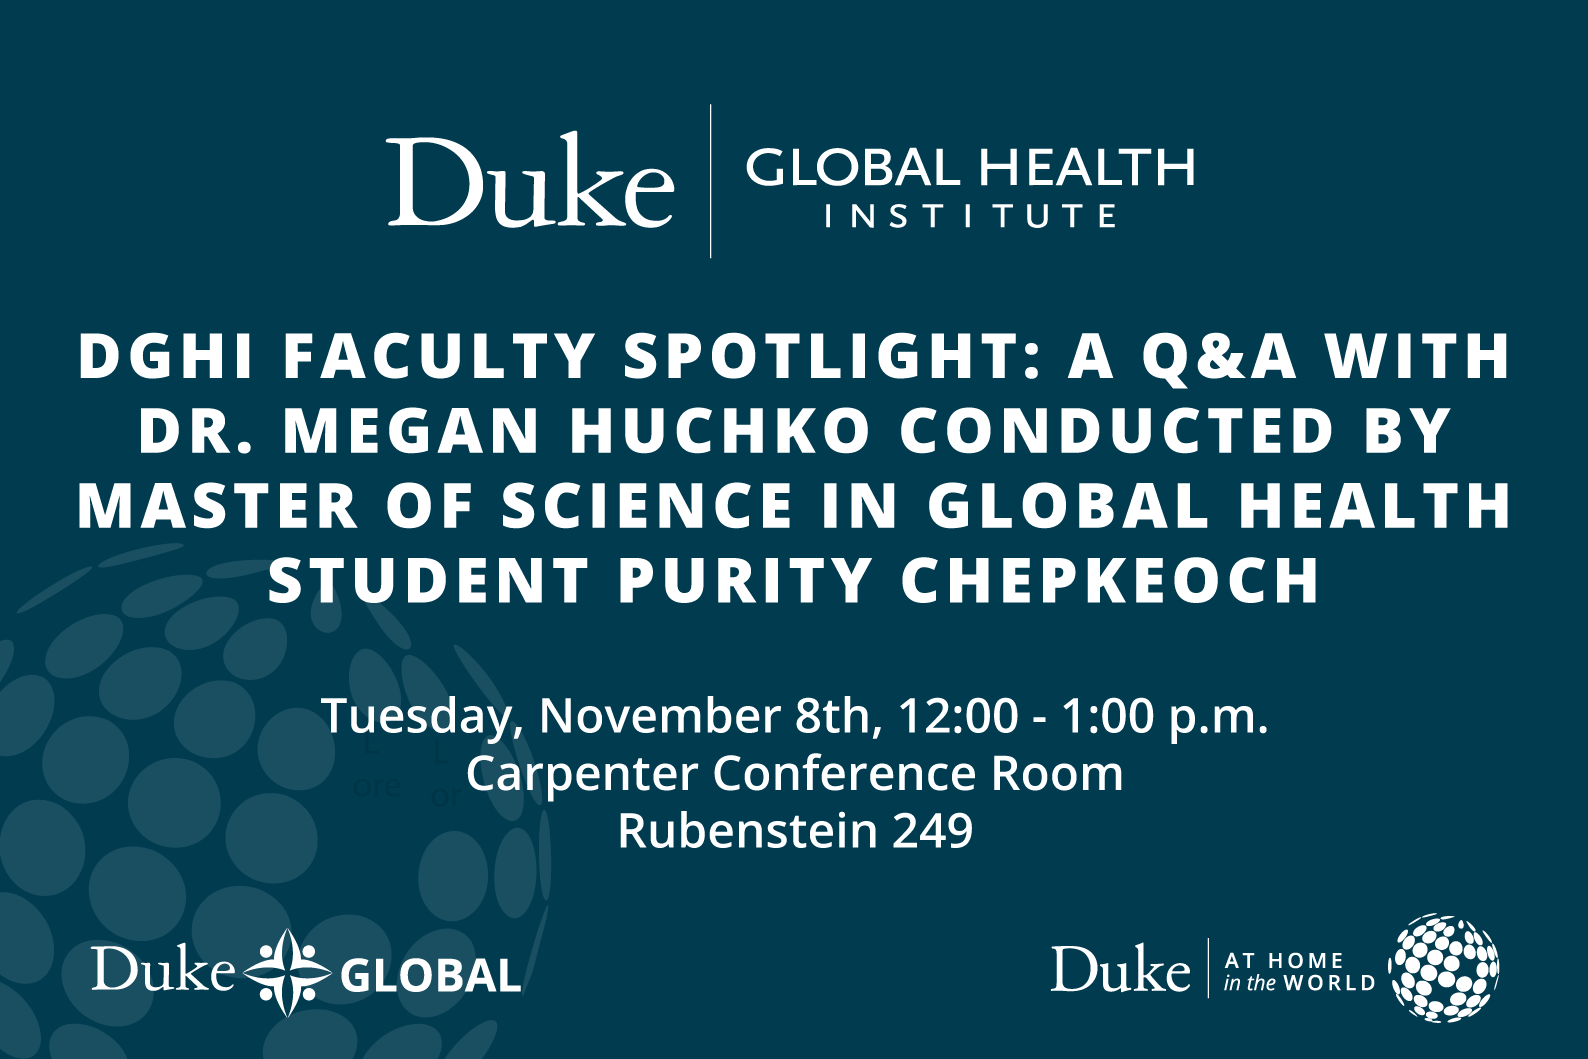 DGHI Faculty Spotlight: A Q&amp;A with Dr. Megan Huchko conducted by Master of Science in Global Health student Purity Chepkeoch Tuesday, November 8th, 12:00 - 1:00 p.m. Carpenter Conference Room (Rubenstein 249)